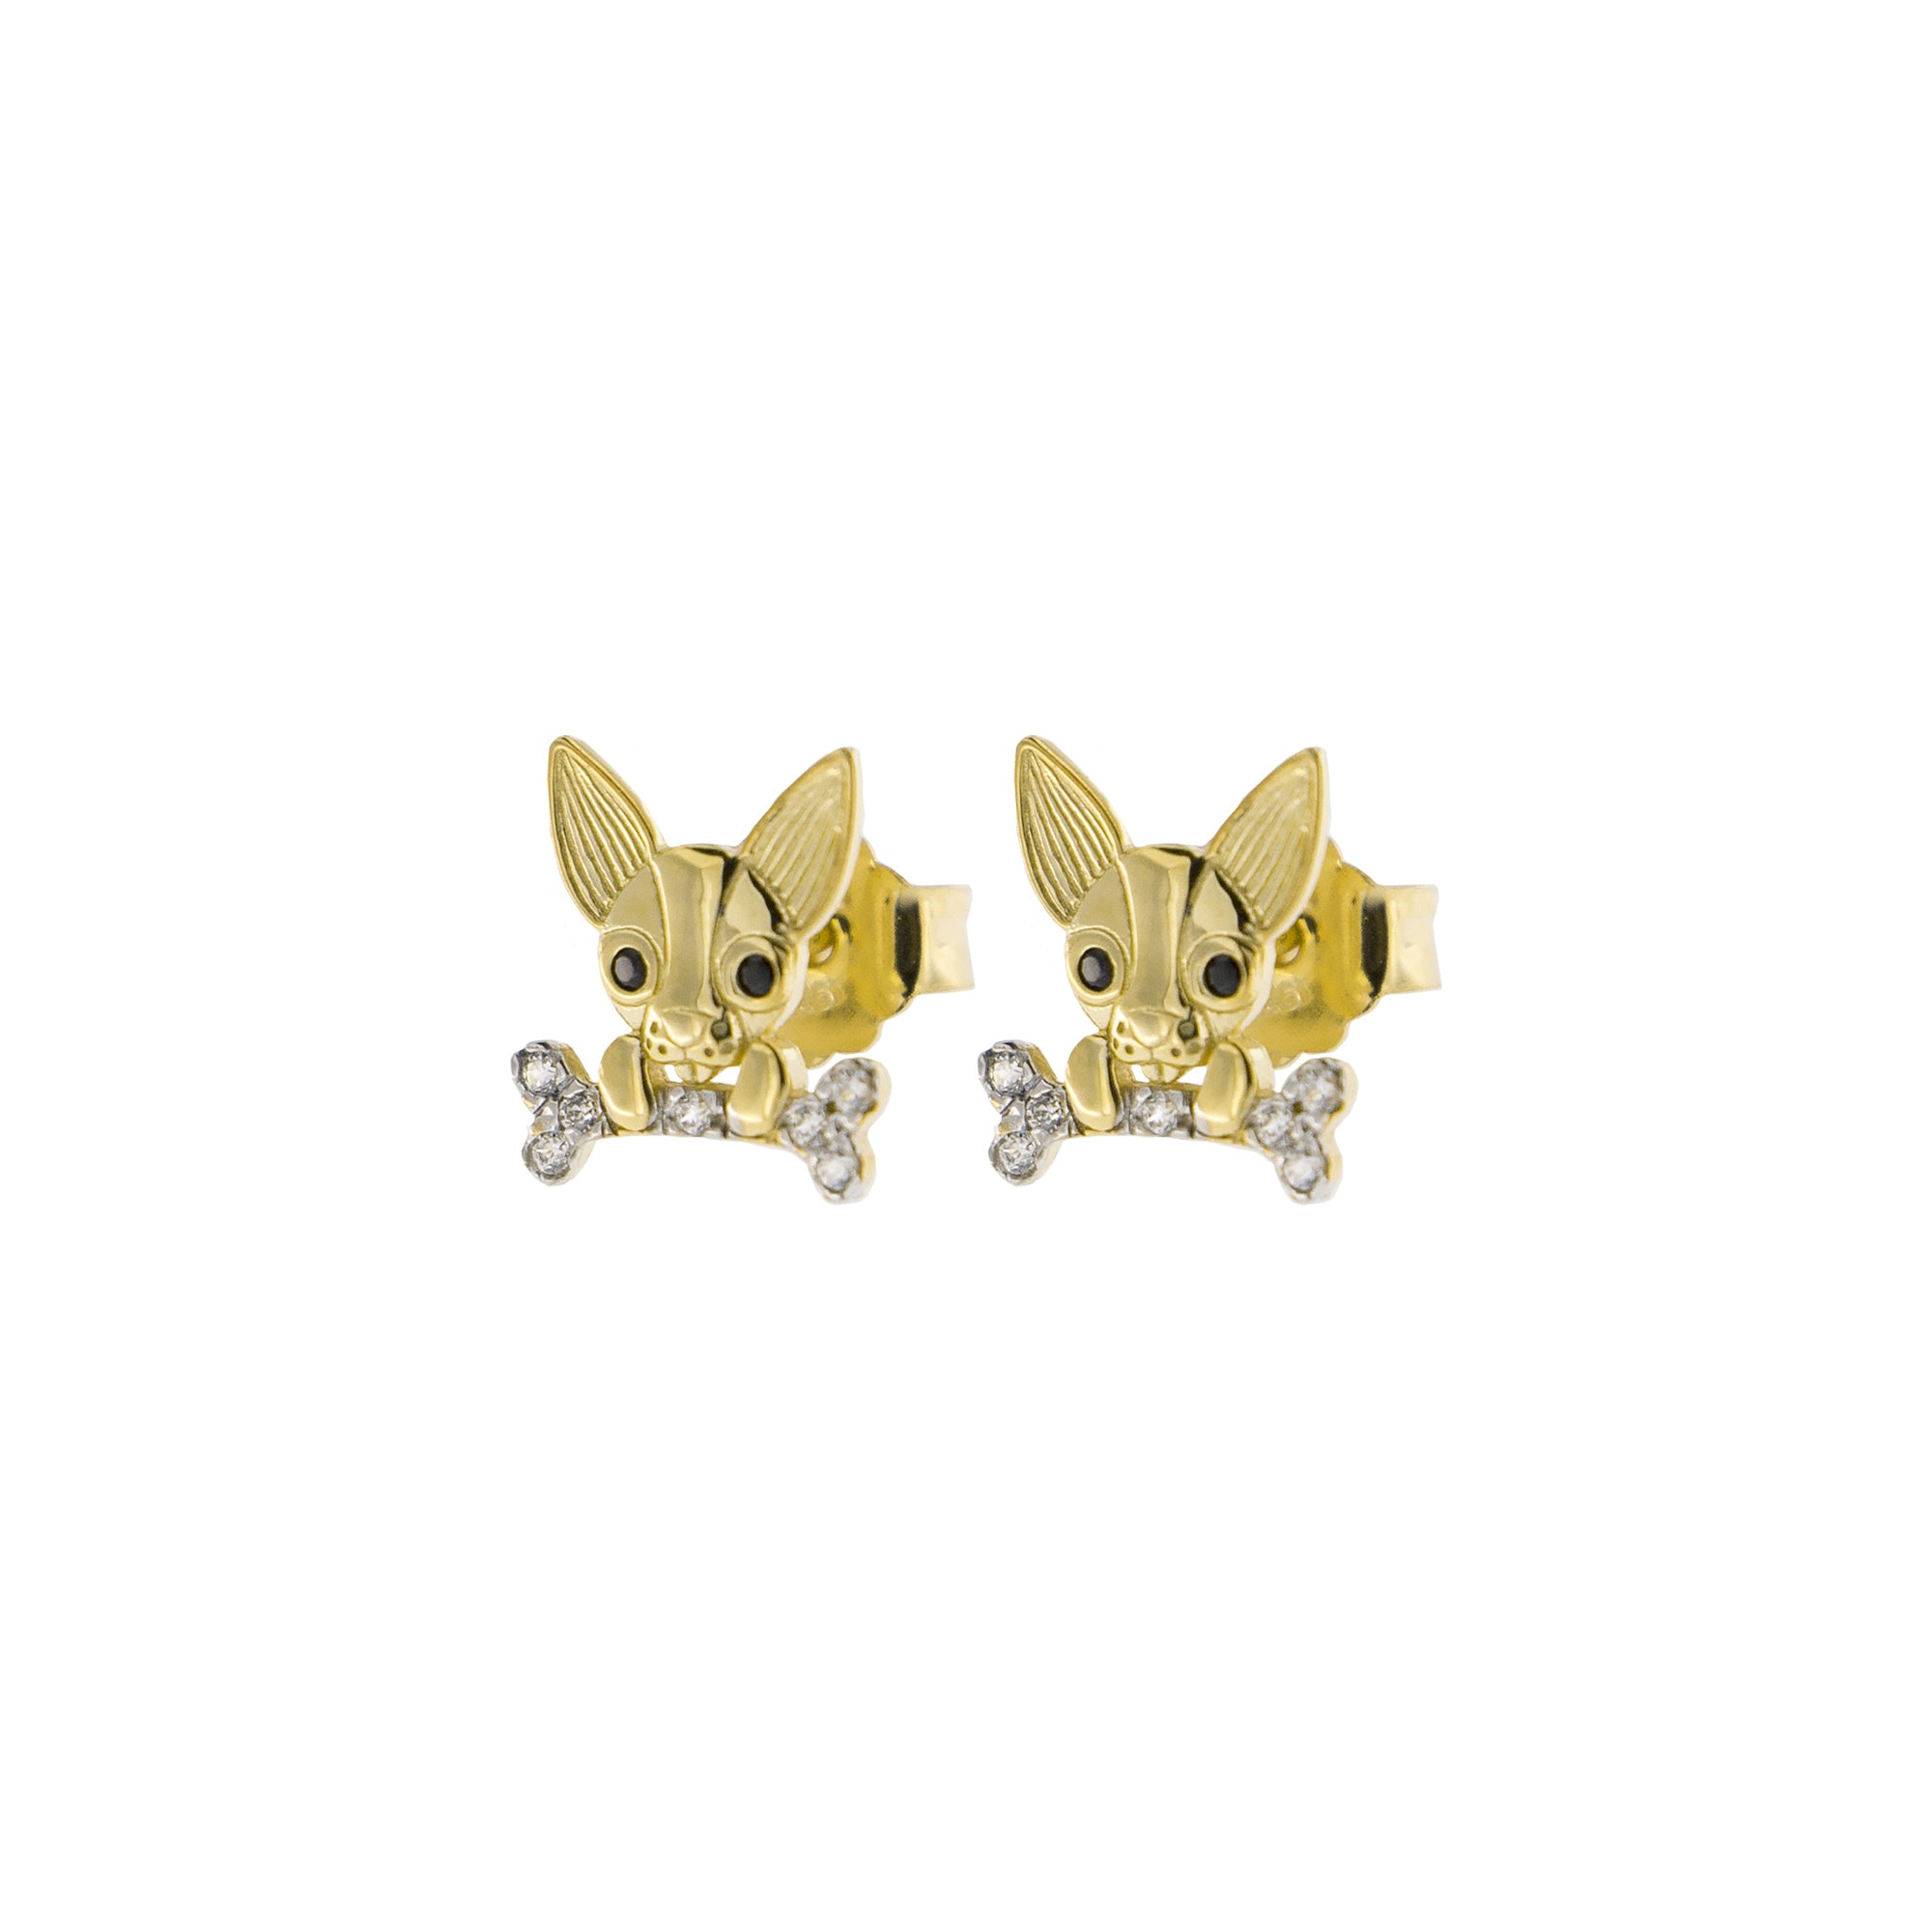 Earrings - Zirconia Earrings With Chihuahua  - 2 | Rue des Mille